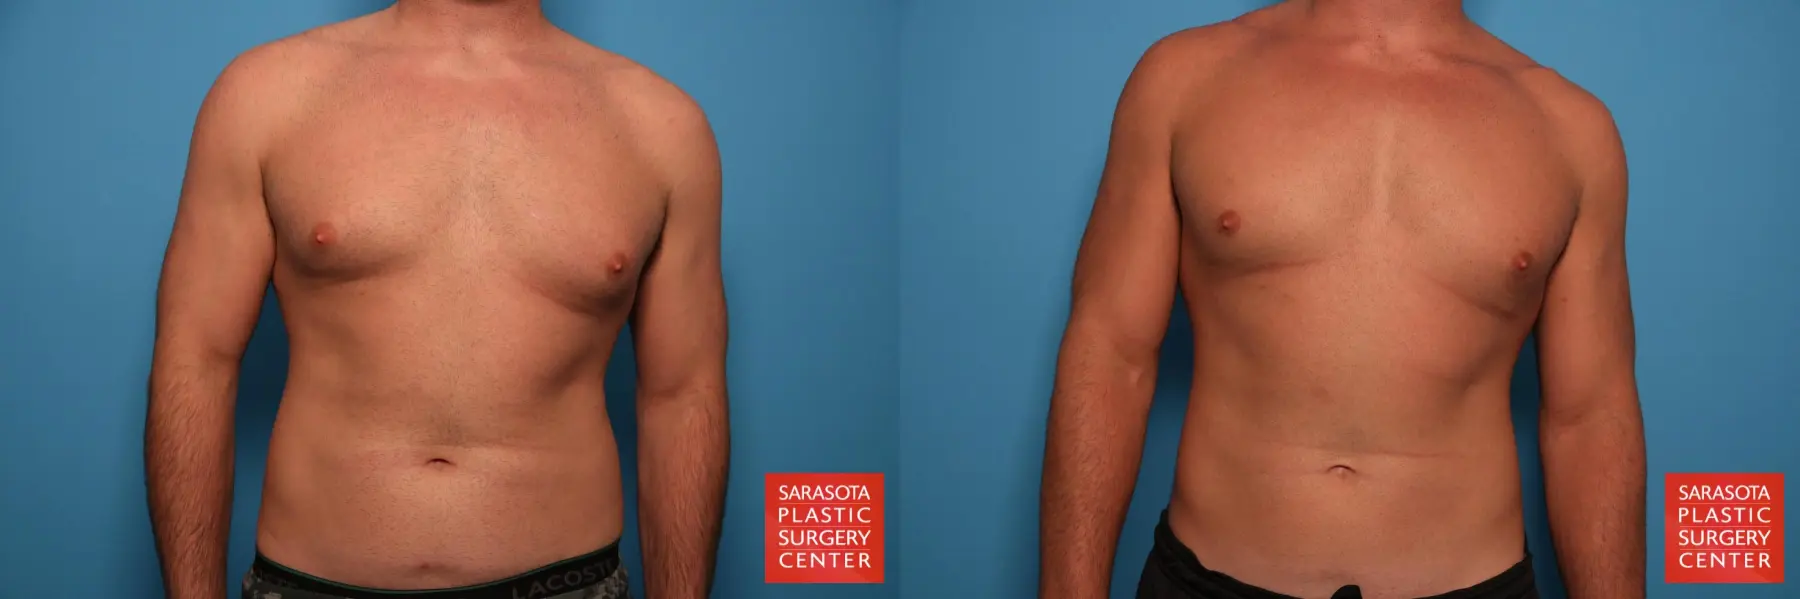 Gynecomastia: Patient 1 - Before and After 1